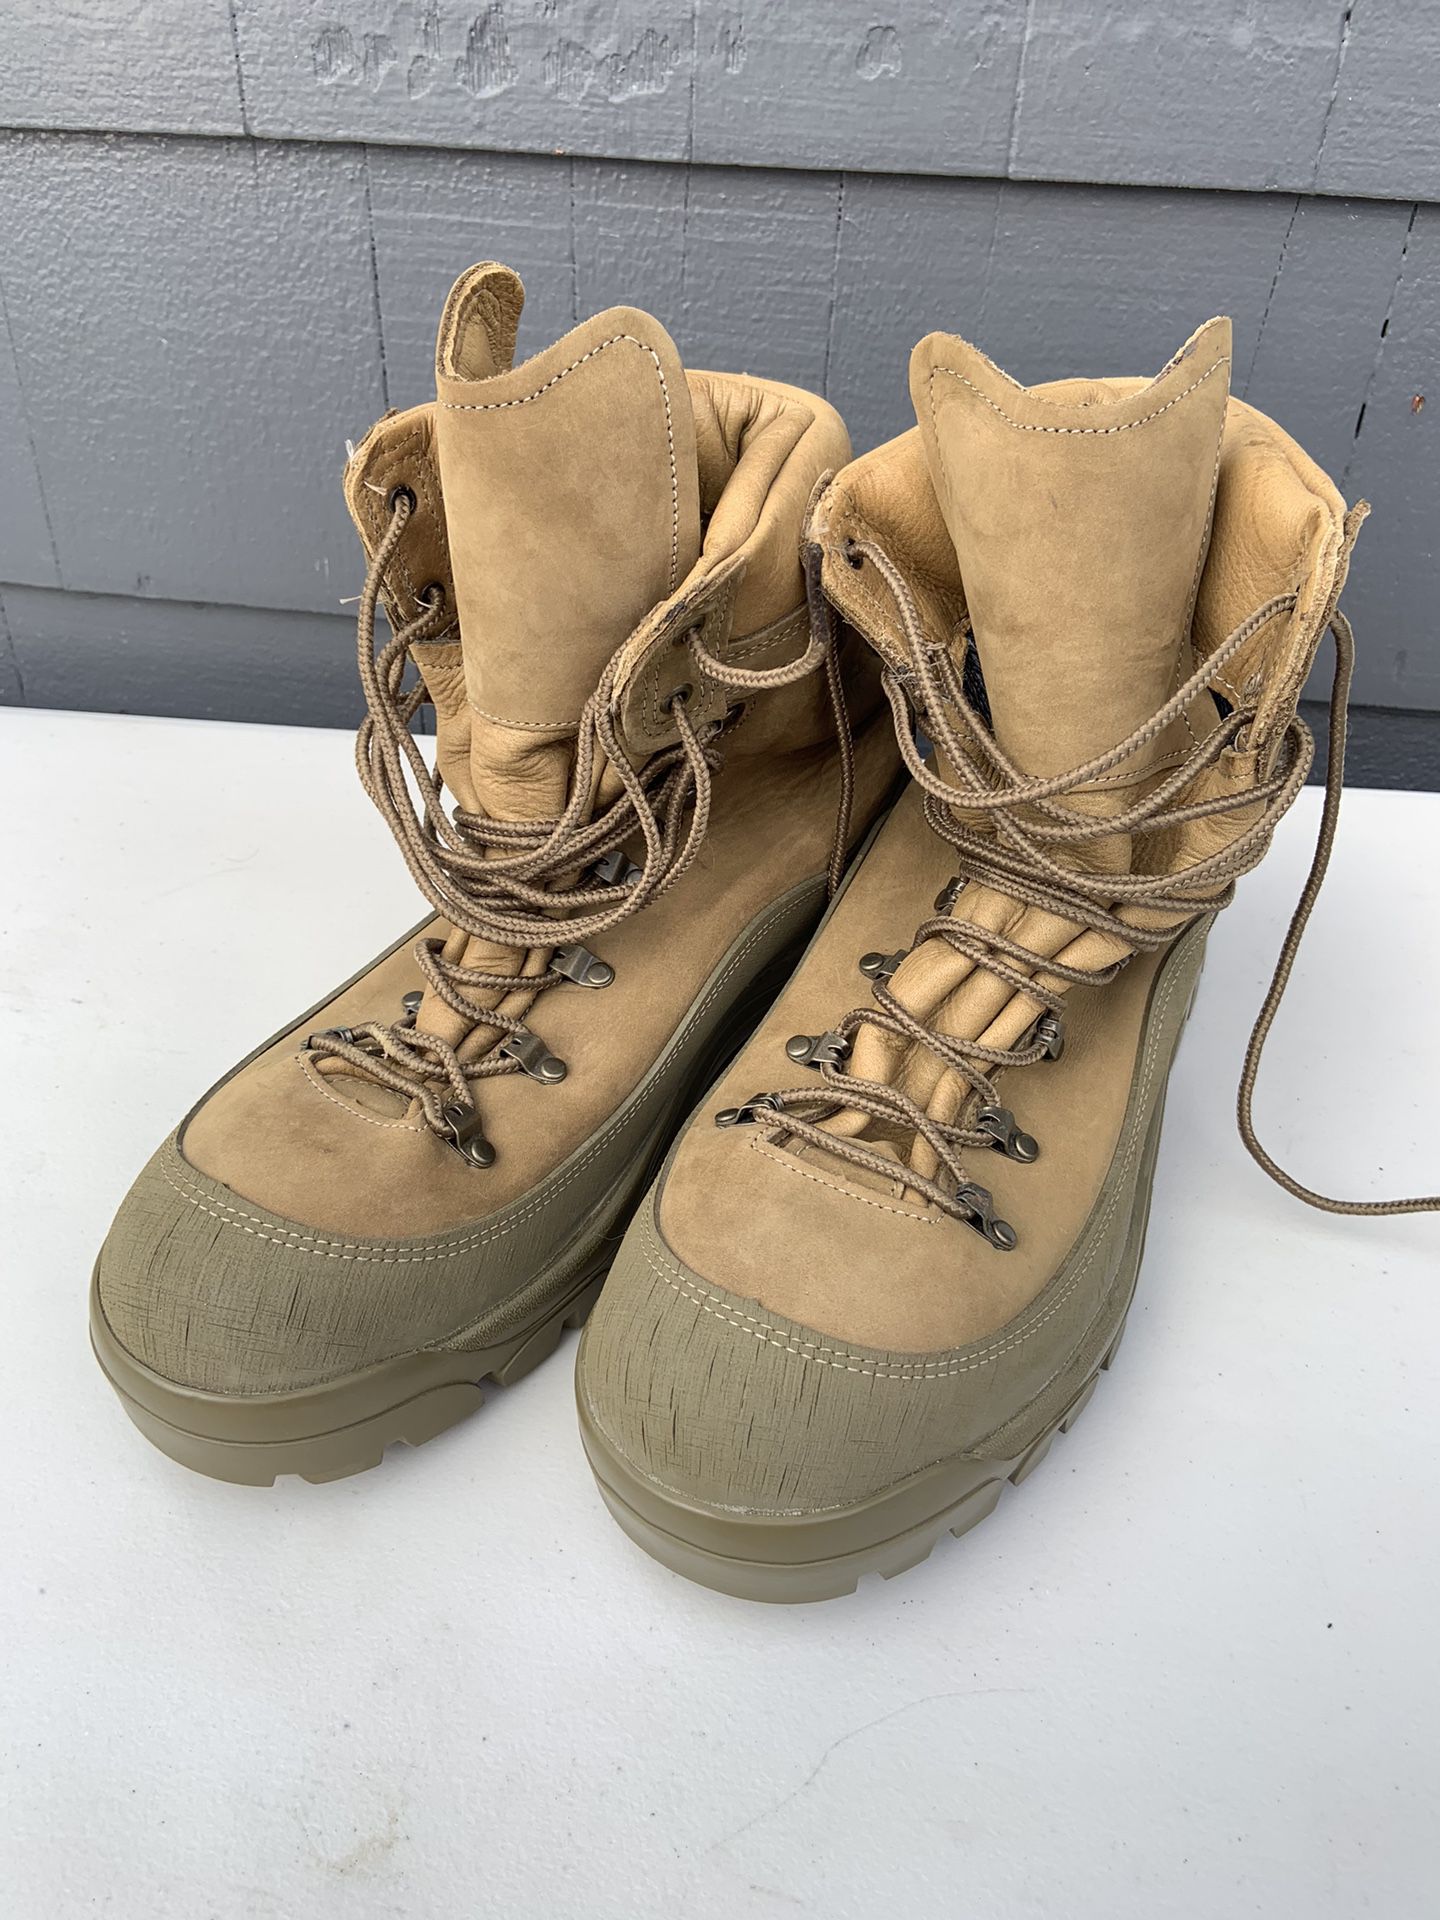 Belleville Military work boots, size 11w